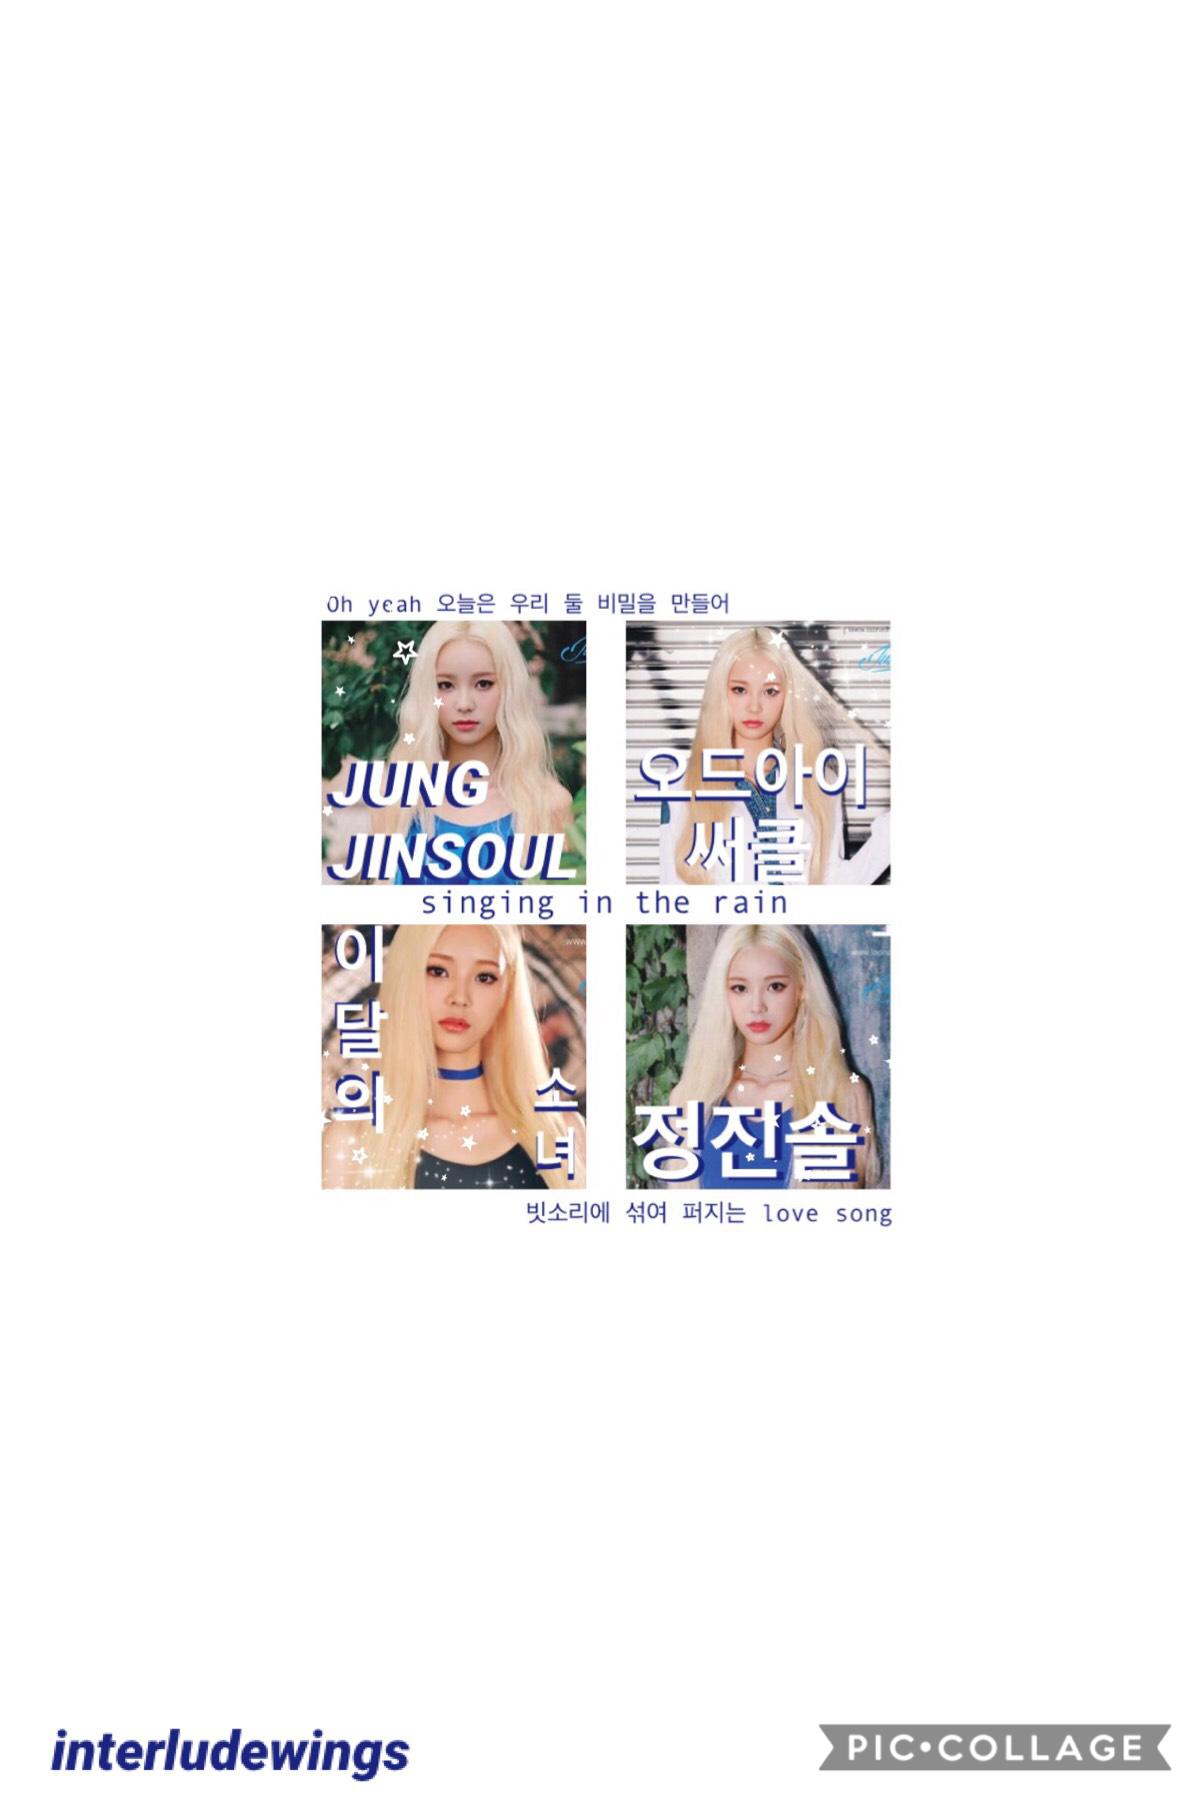 💙 open 💙
jinsoul~loona 
this sucks yikes 